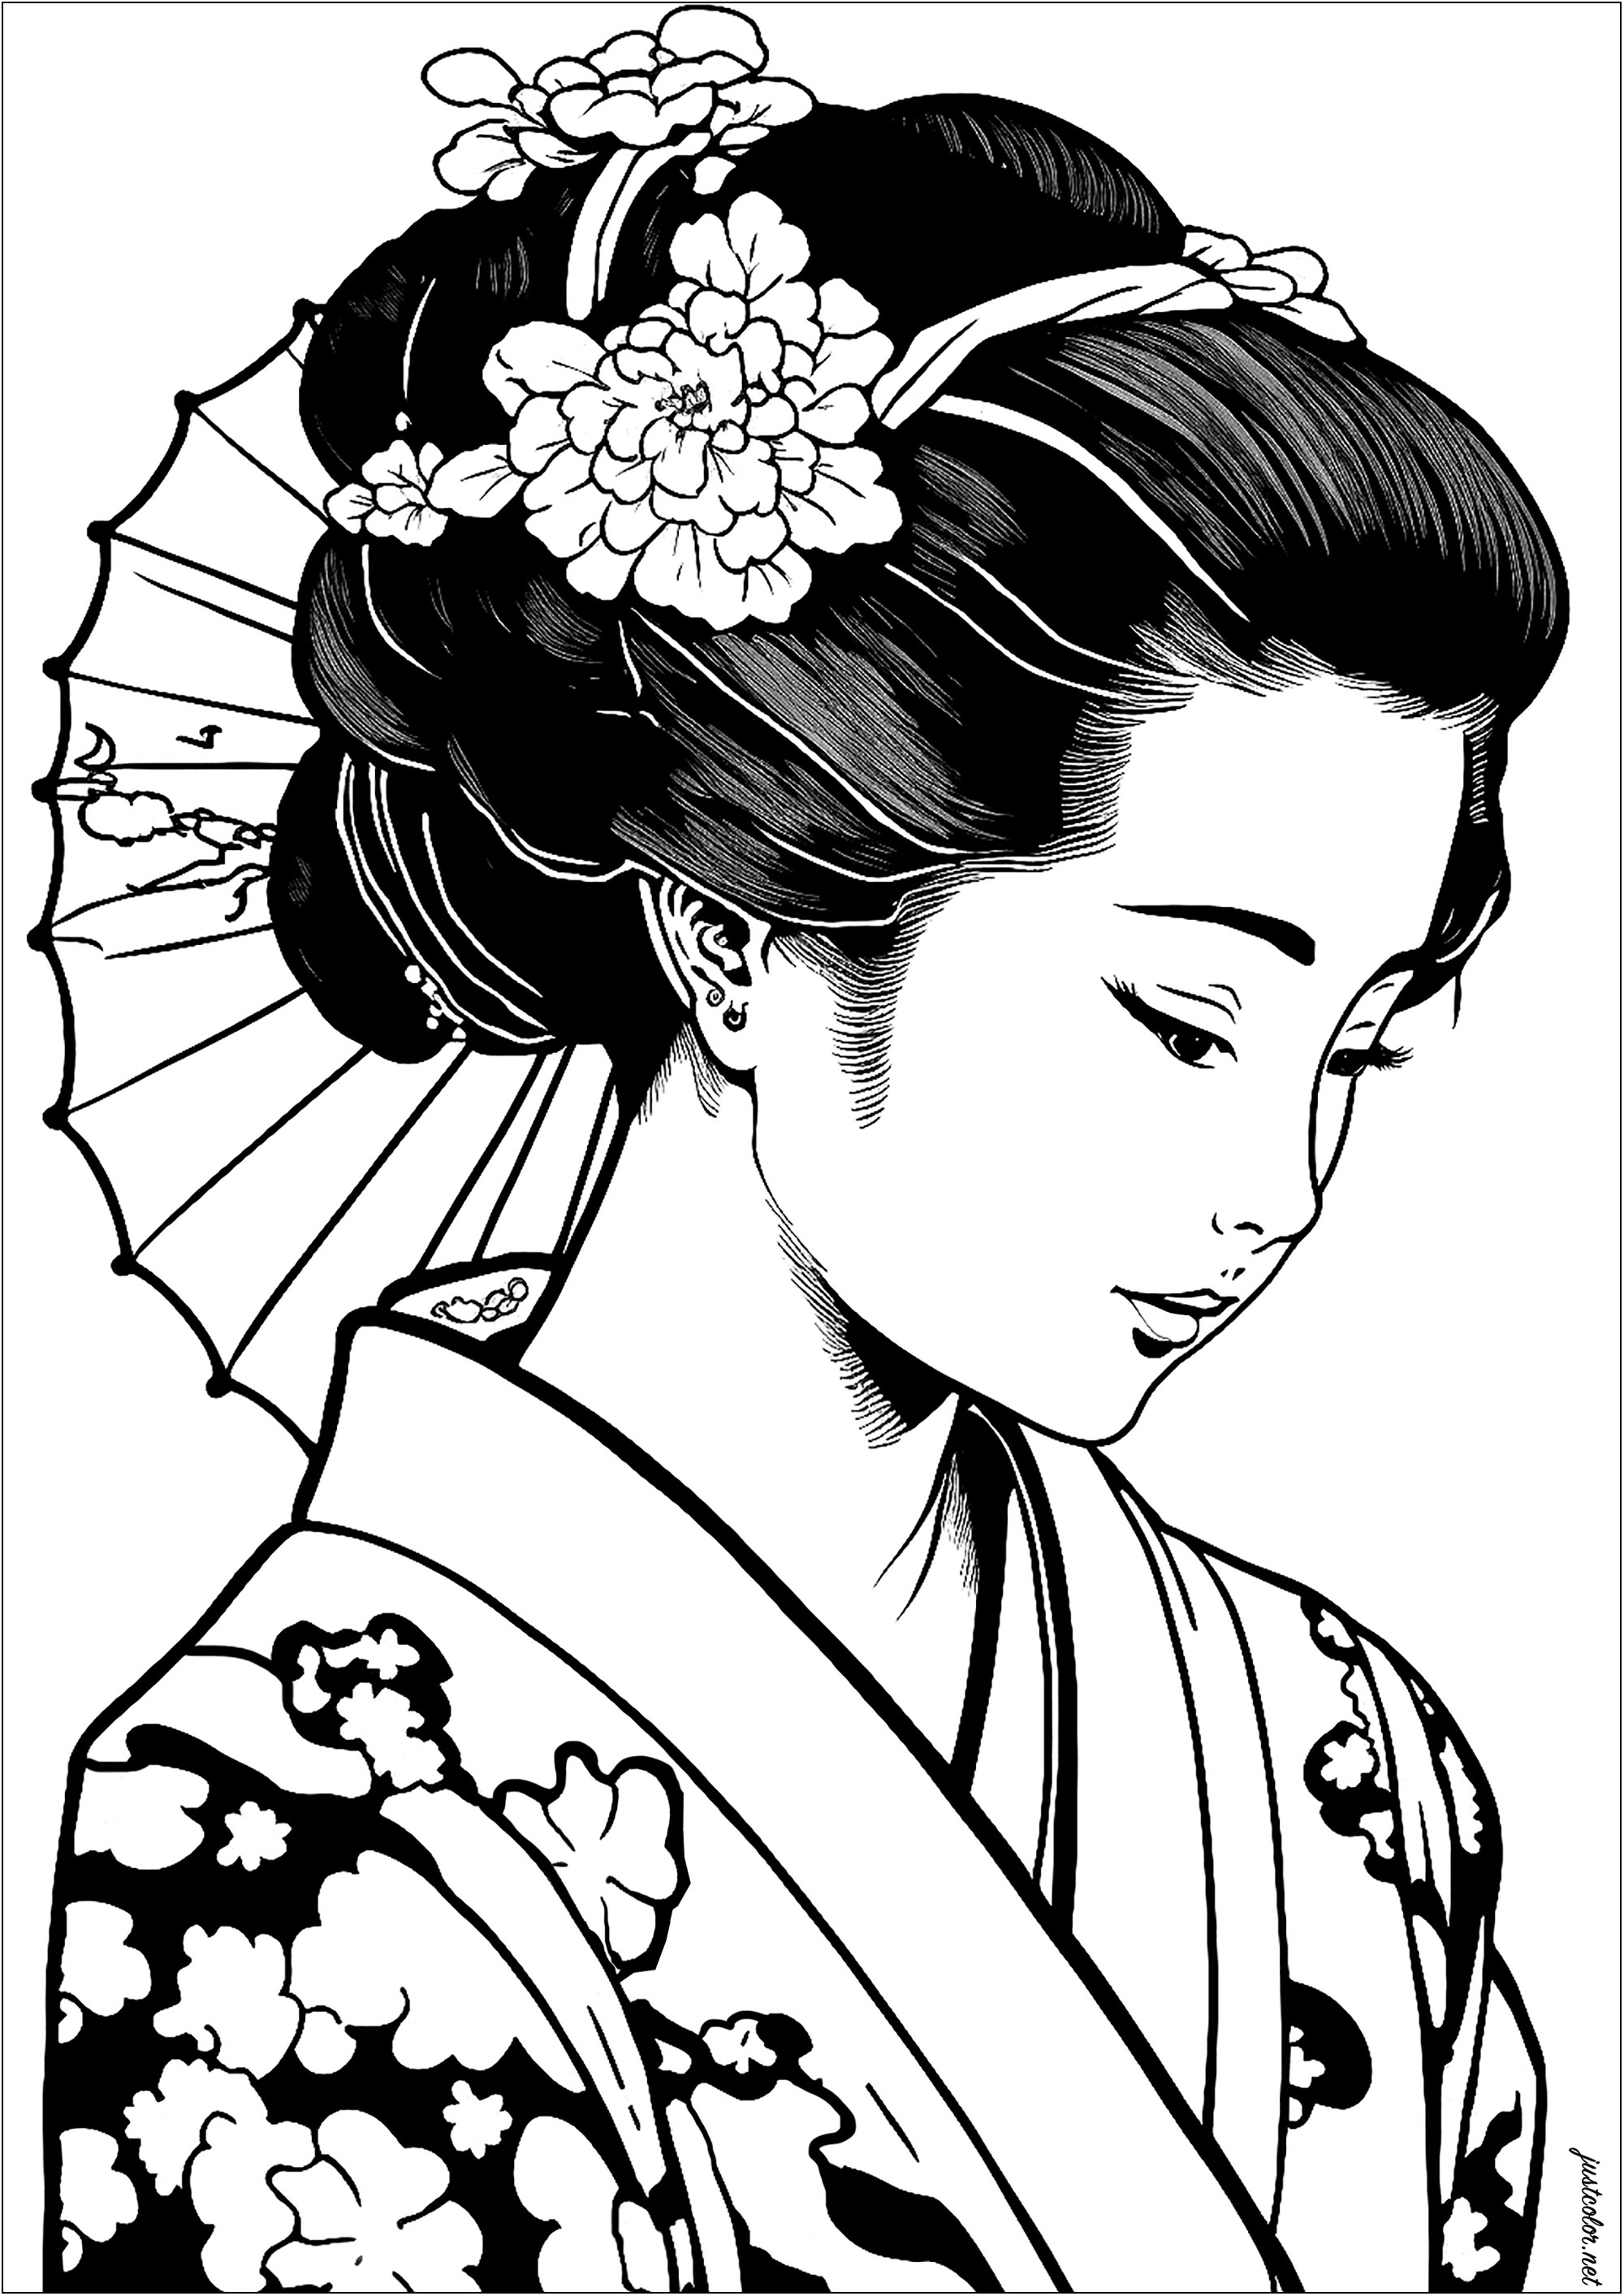 A pretty Geisha, very realistic, to color. This coloring page is both elegant and charming. Let your imagination run wild and add beautiful colors to her kimono, her parasol and the flowers on her headband.